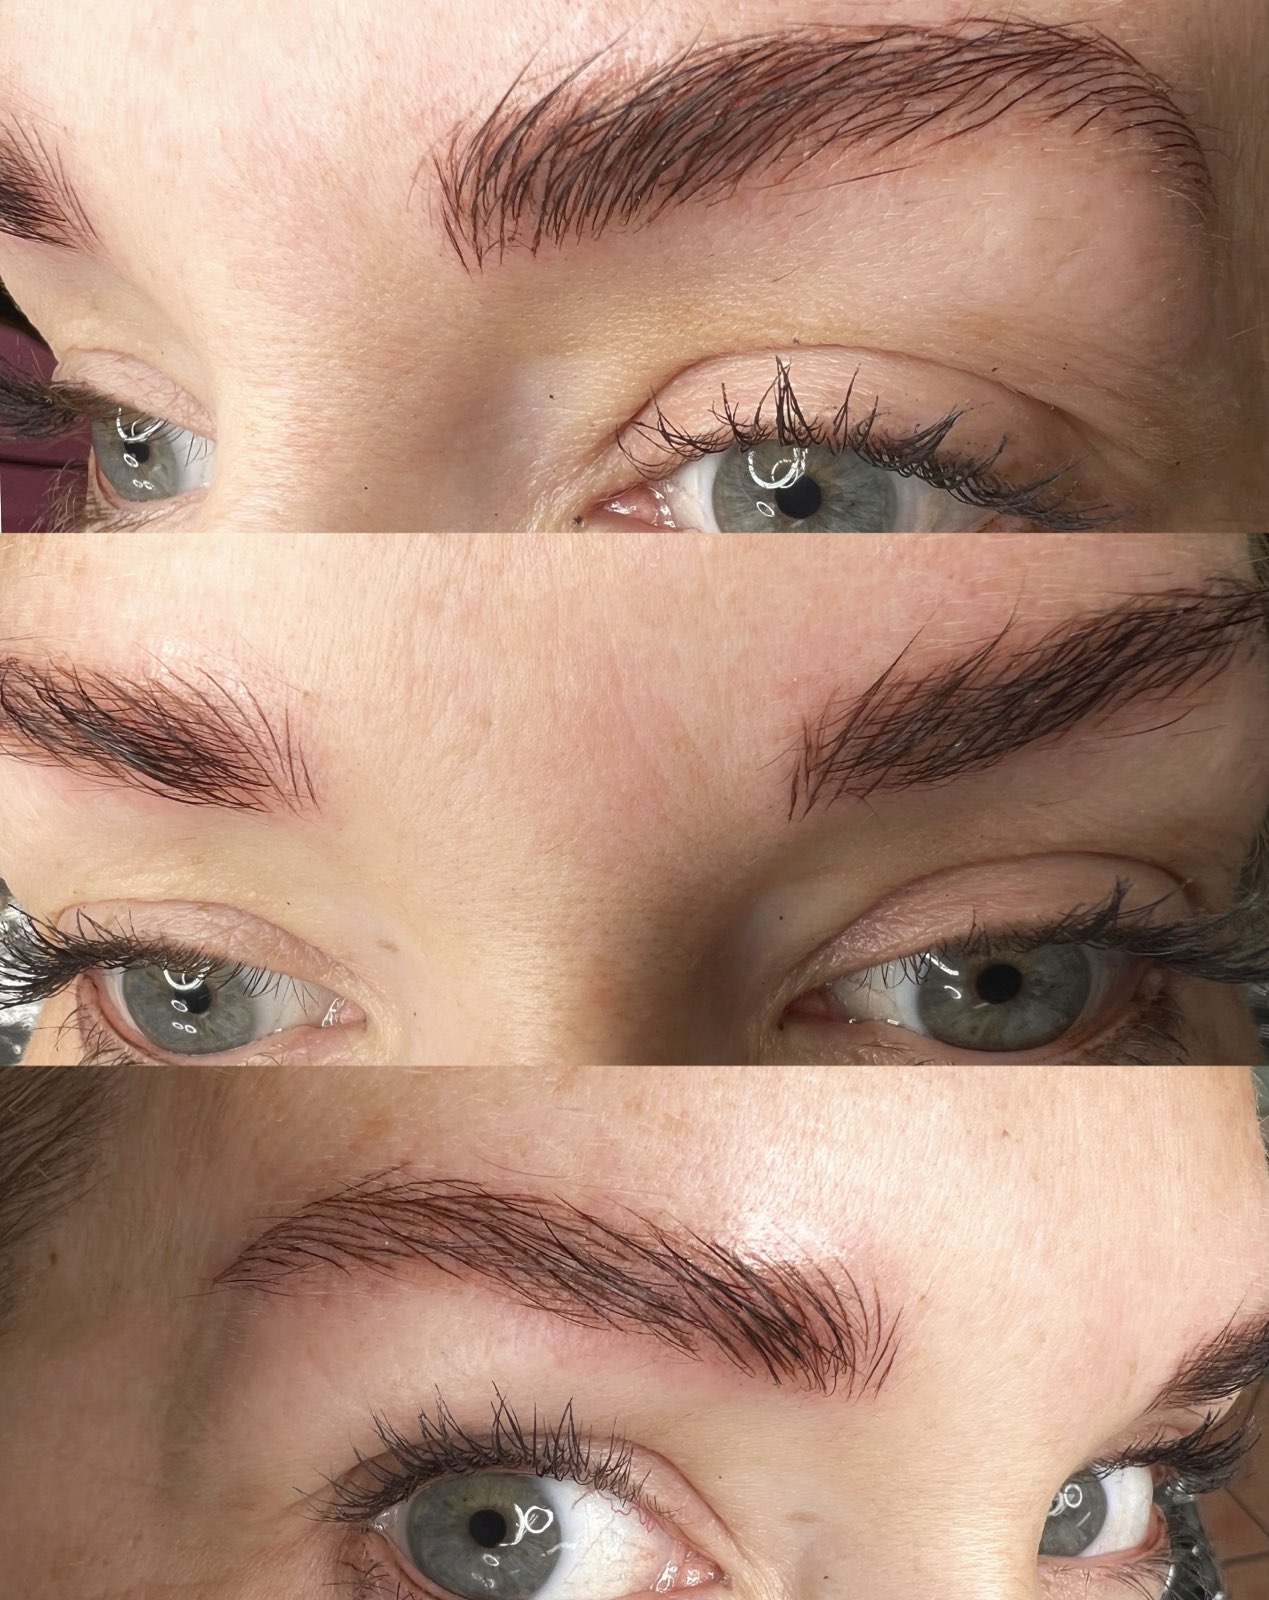 Our experienced eyebrow artist performing a feather touch eyebrow procedure in Hobart, illustrating the precision and care taken during the process.